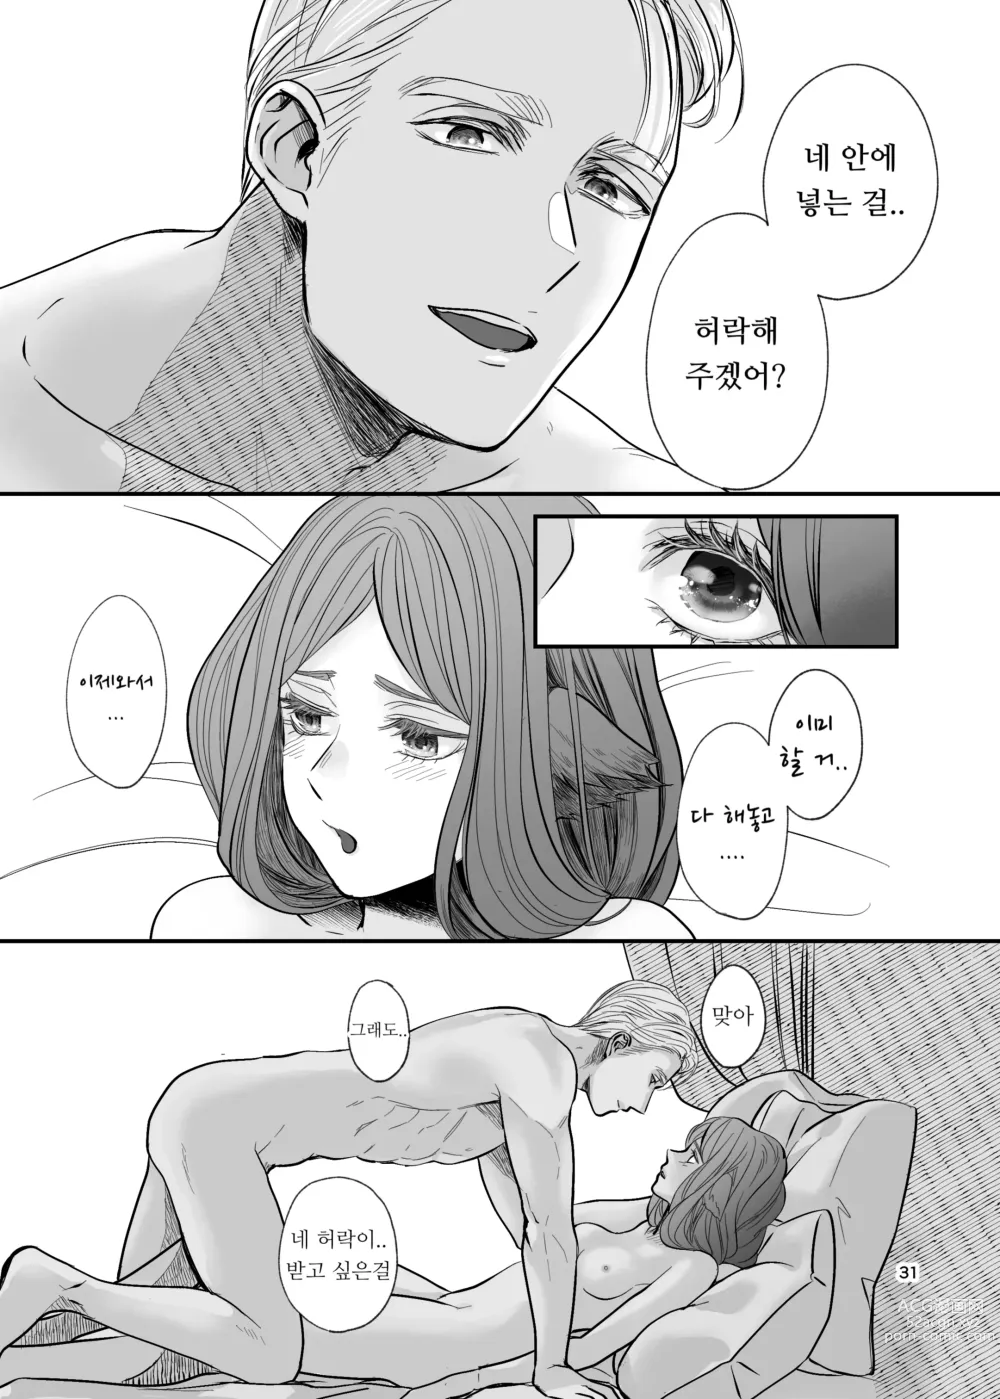 Page 31 of doujinshi 수인 영애와 혼약자